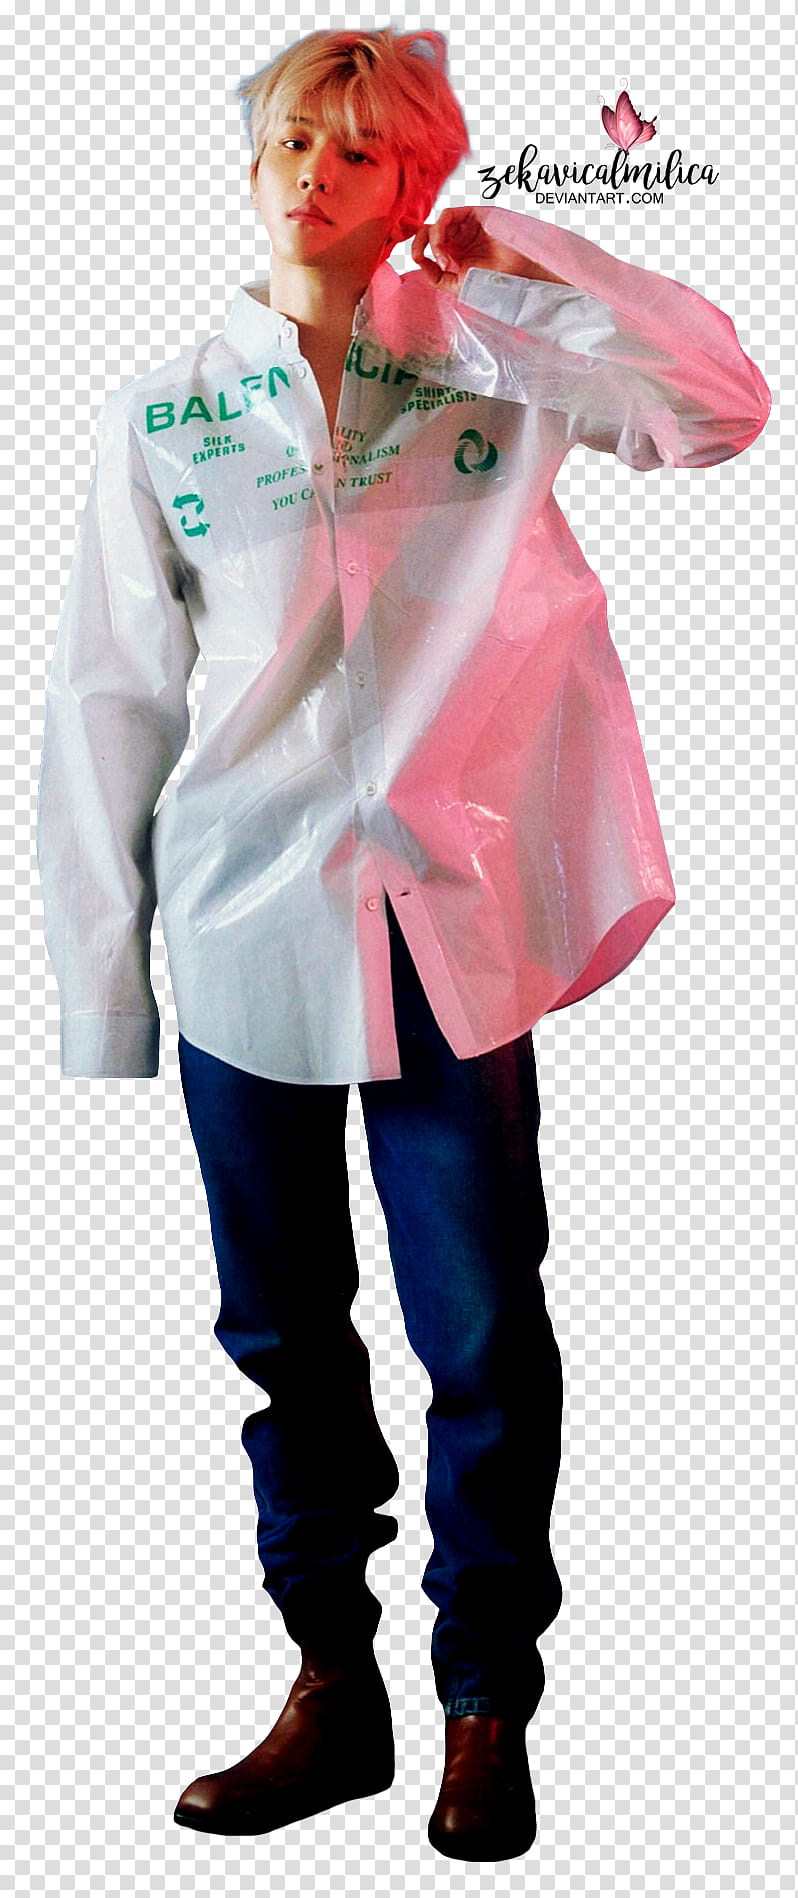 EXO Baekhyun Lined, standing man in white dress shirt transparent background PNG clipart